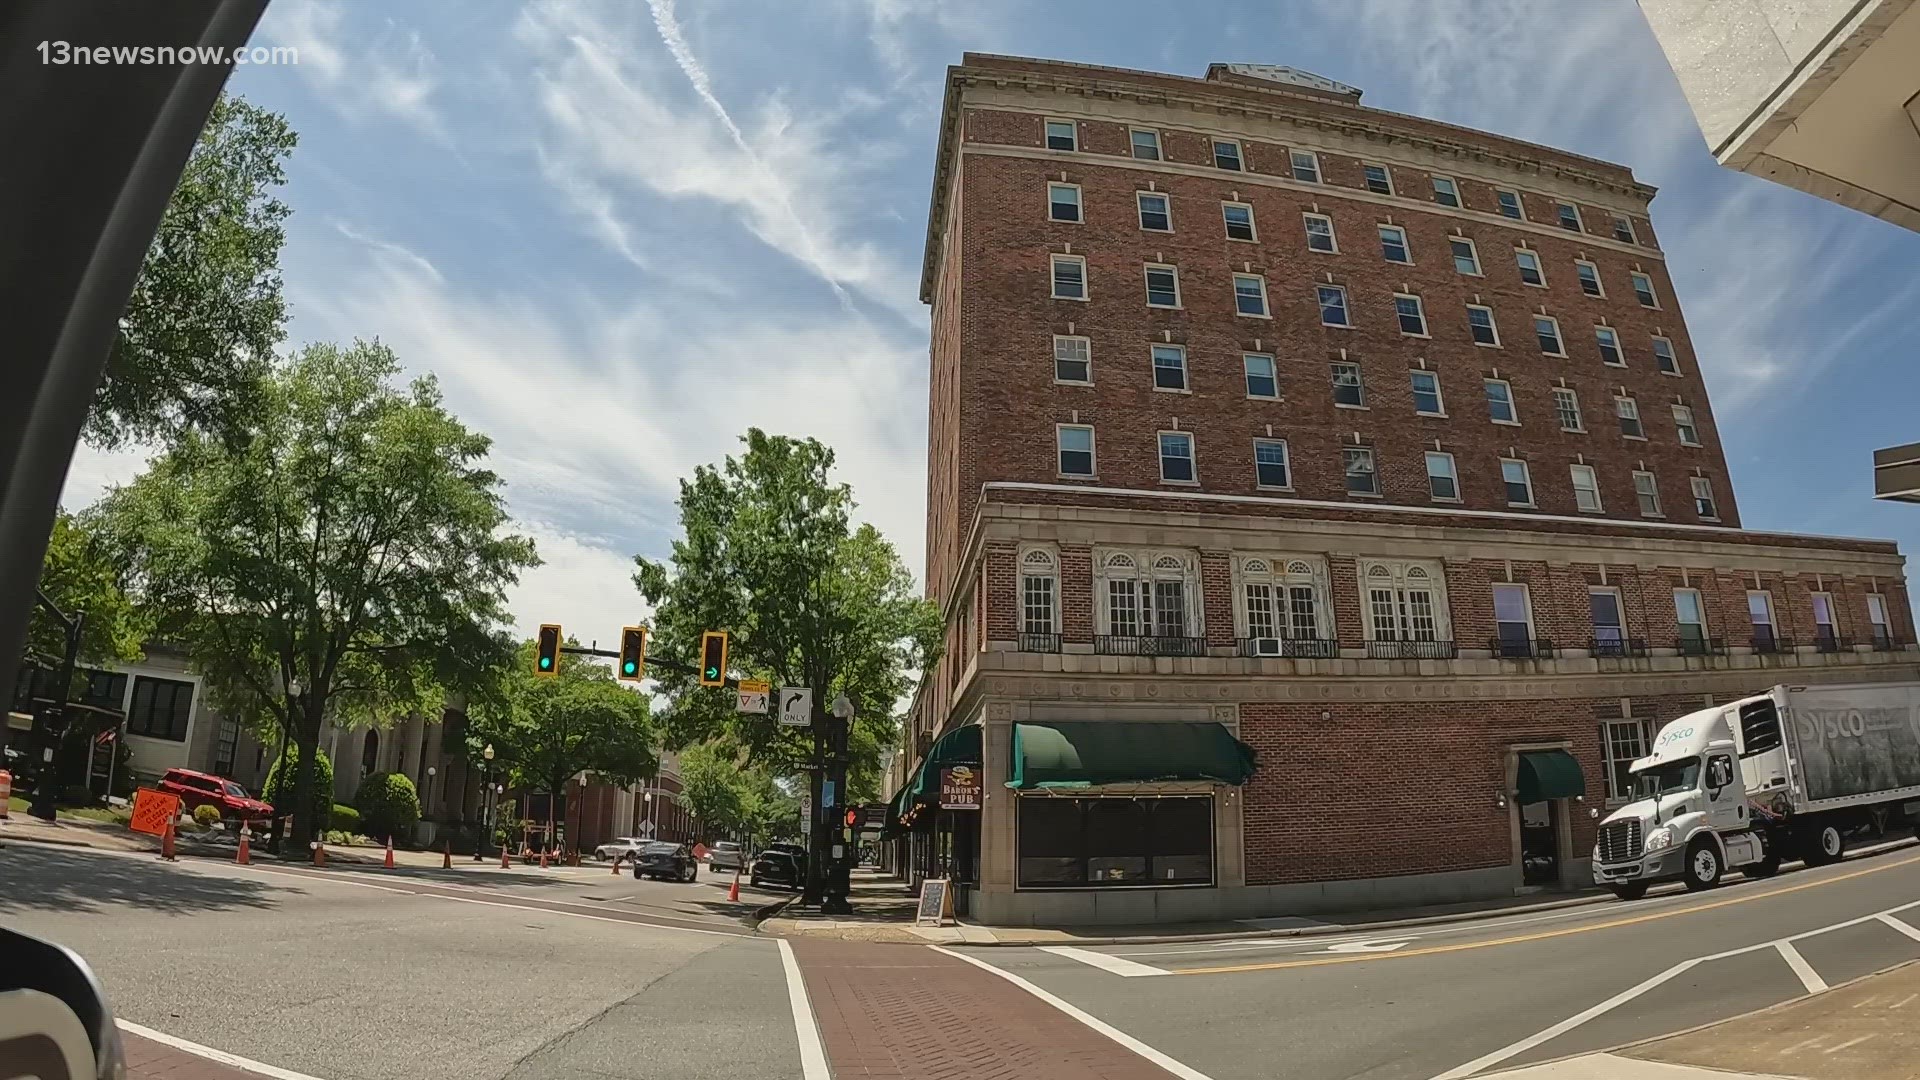 A facelift is planned for the historic former Elliott Hotel in Suffolk. There are hopes it could re-energize the downtown district.